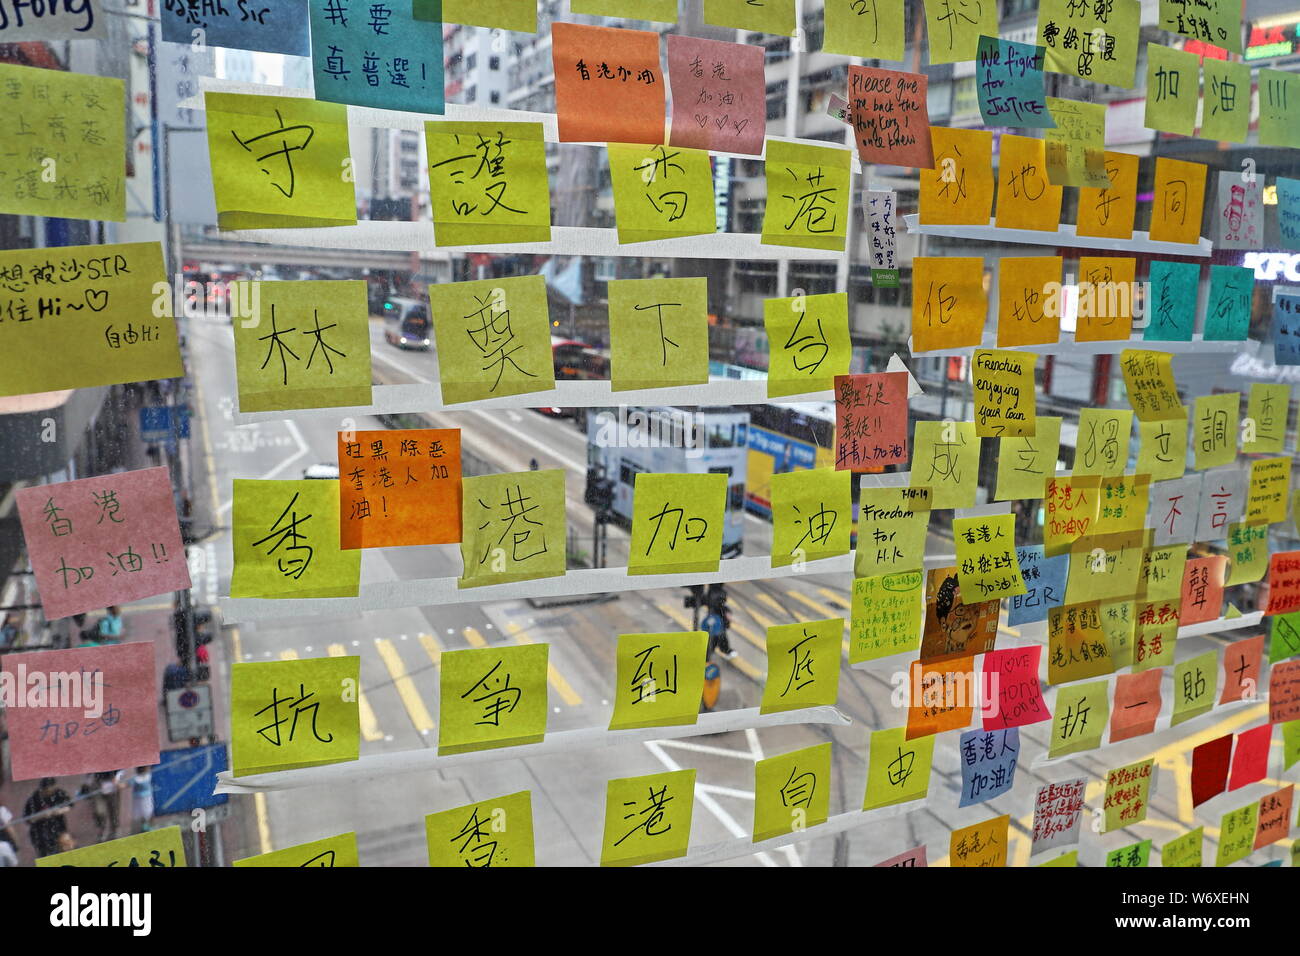 CAUSEWAY BAY, HONG KONG - JULY 17, 2019: Lennon Wall with Post It notes stuck on the glass of the Hennessey Road pedestrian overpass, showing support Stock Photo